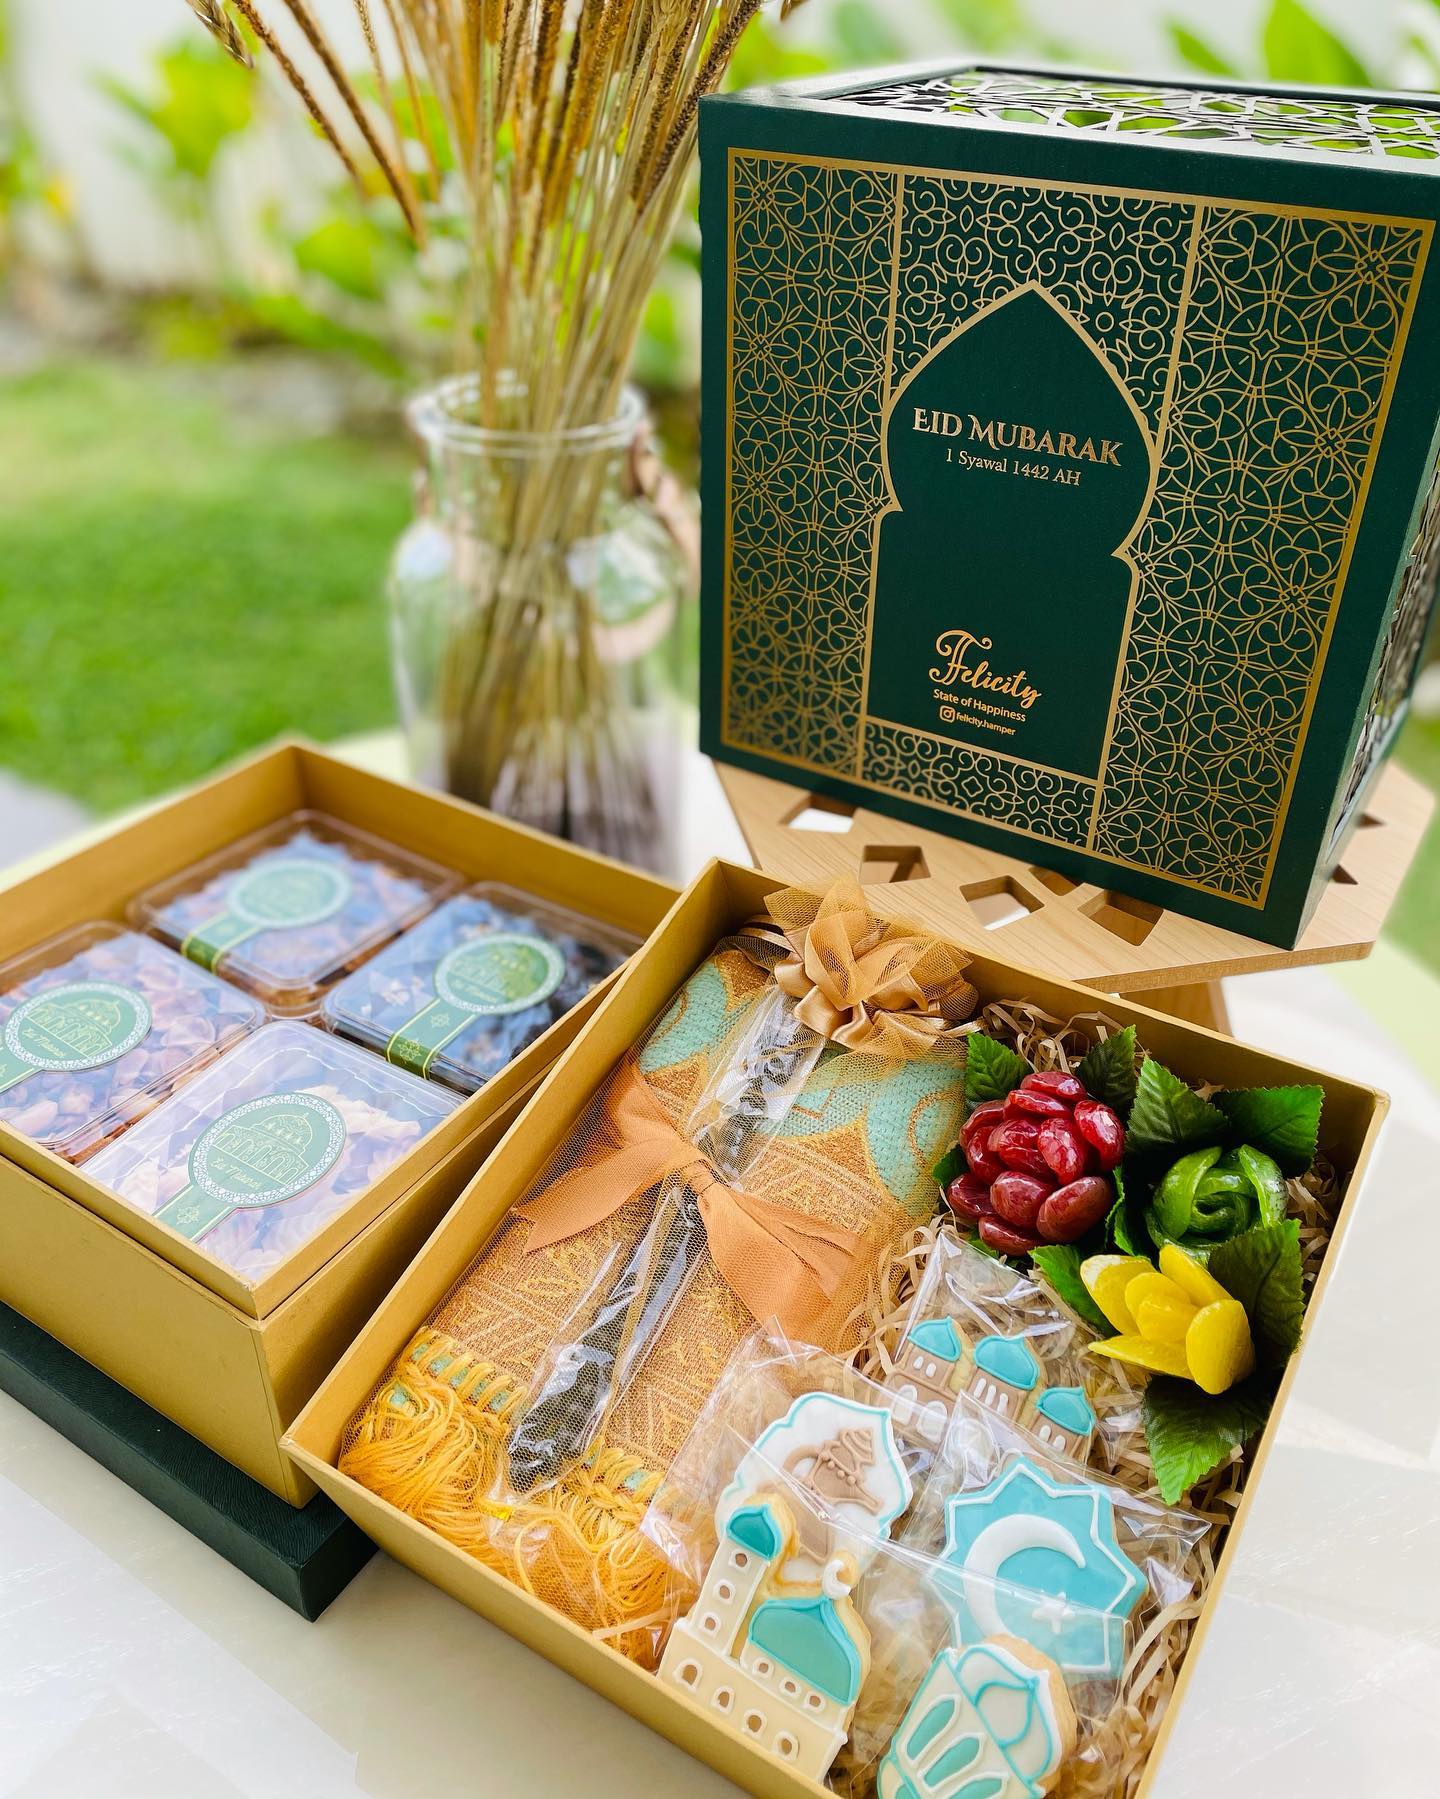 12 Raya Gift Sets & Hampers You Can Send To Your Loved Ones To Brighten